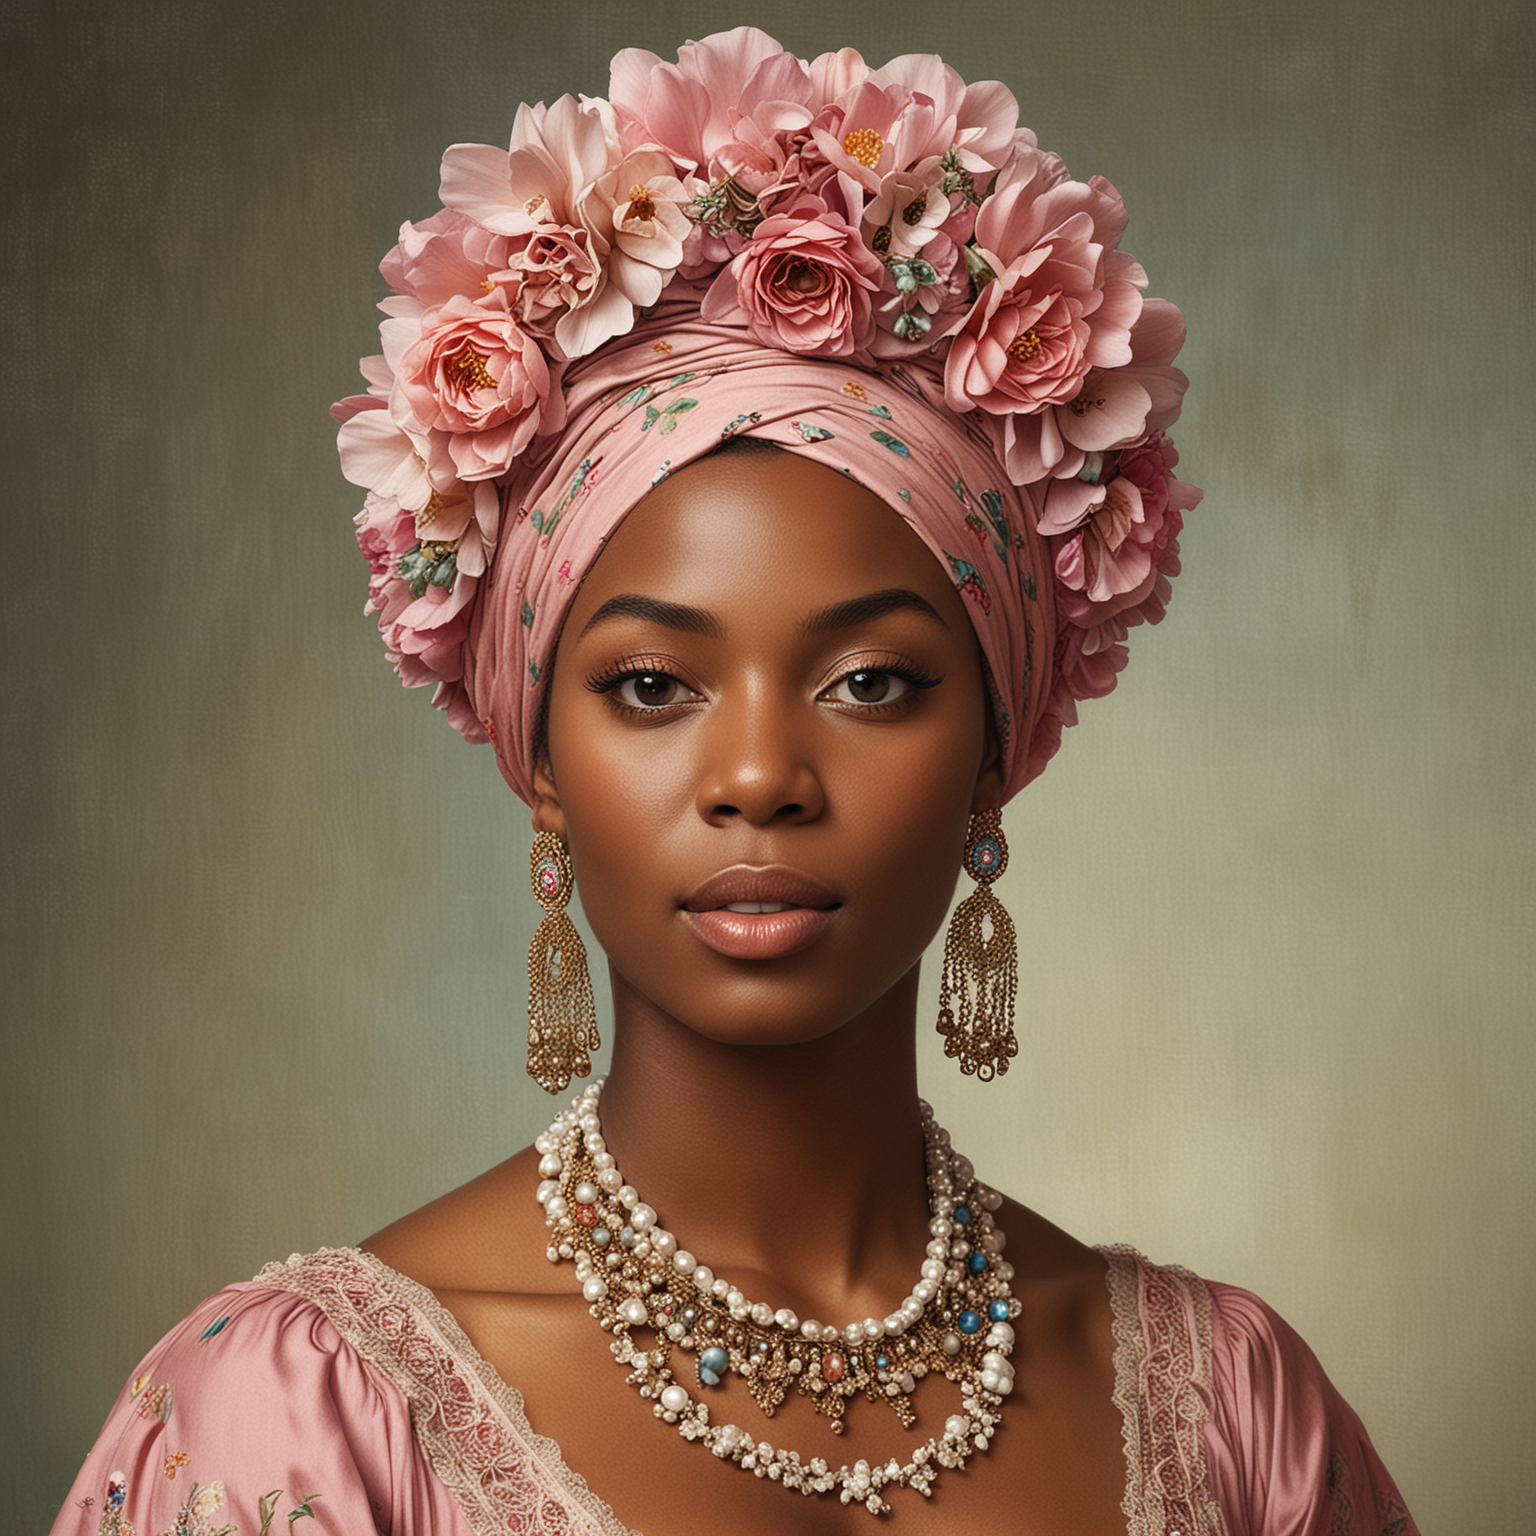 an 18th century black woman in new orleans  during the tignon era. She is beautiful. She is dressed up and her hair is wrapped in a beautiful headwrap that is adorn with flowers and gems.